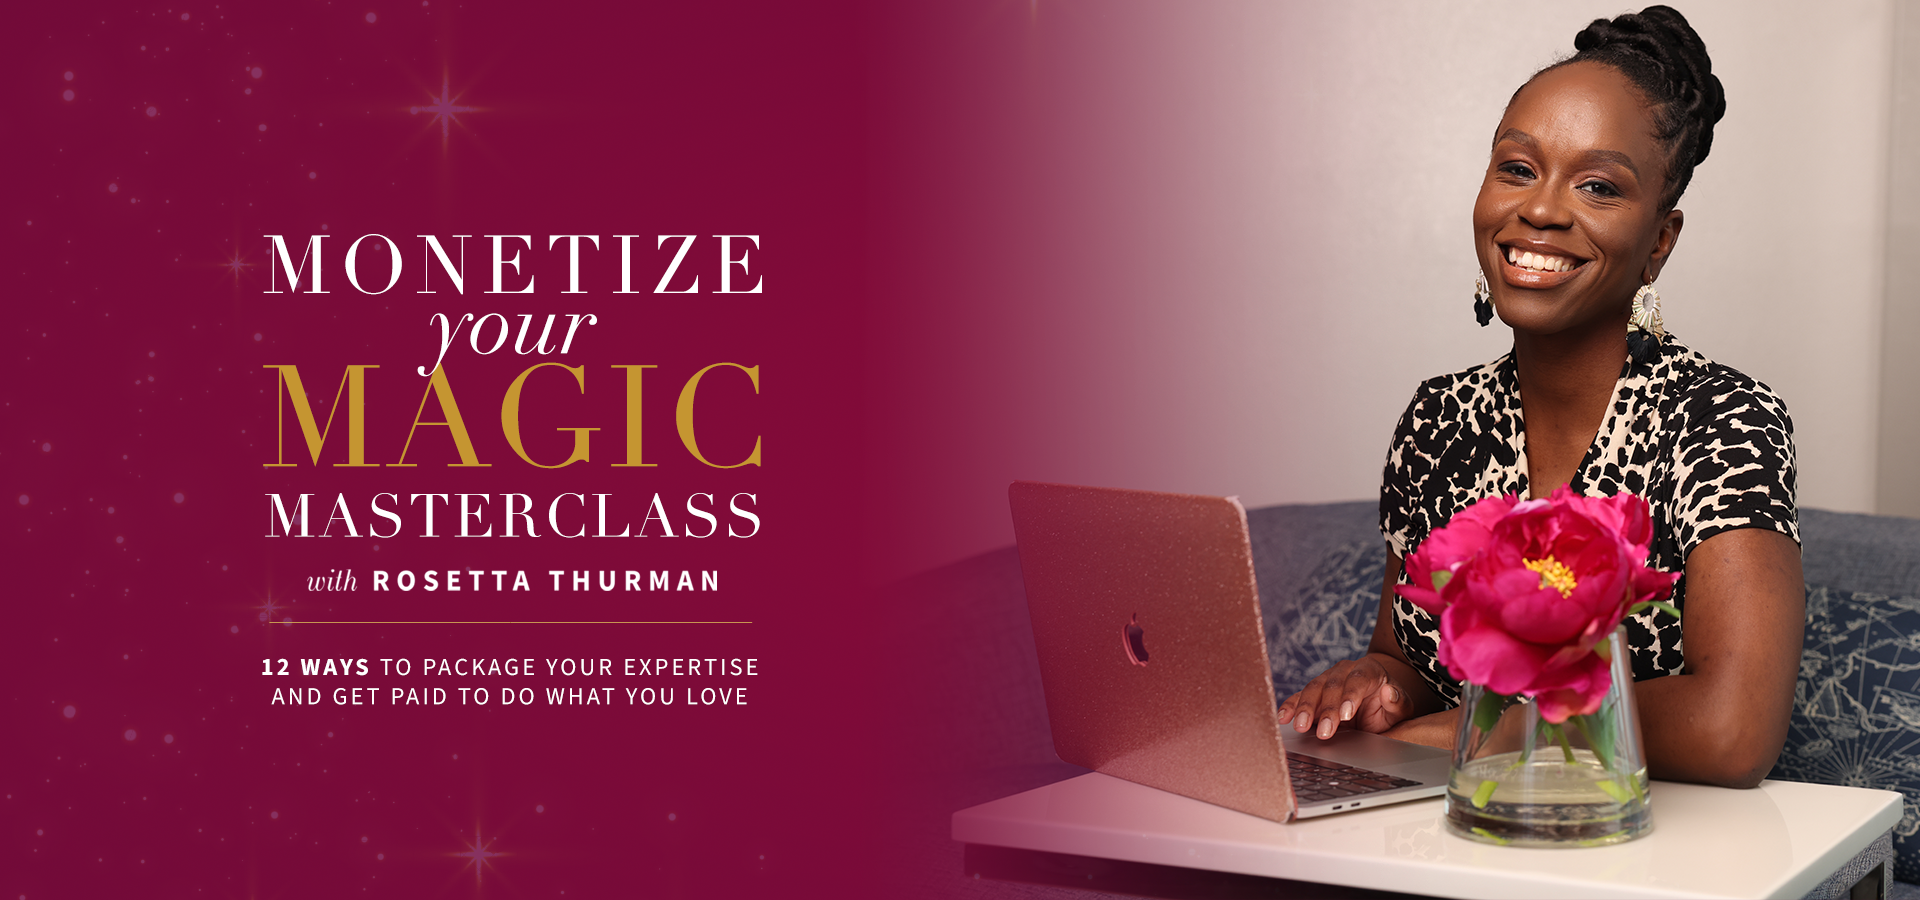 Monetize Your Magic Masterclass with Rosetta Thurman: 12 Ways to Package Your Expertise and Get Paid to Do What You Love 